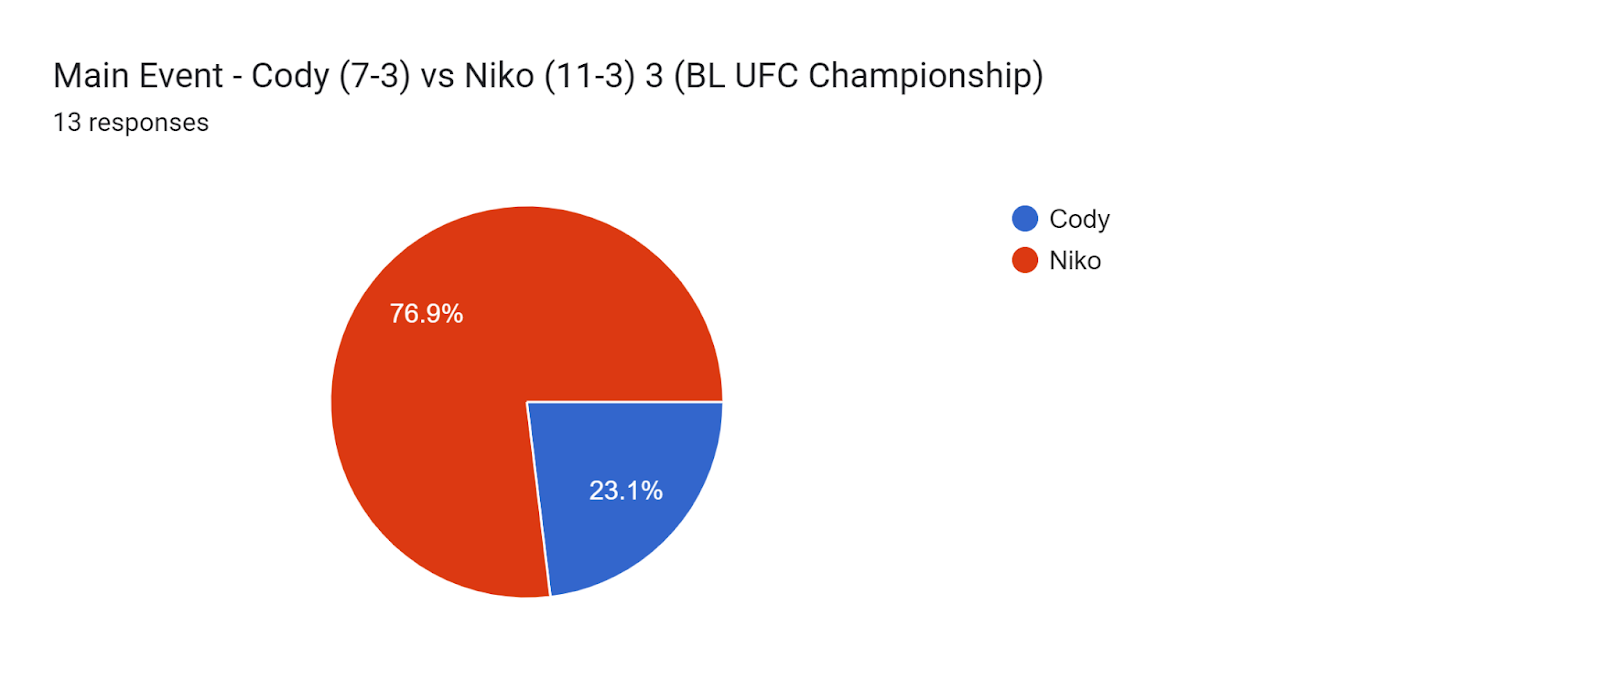 Forms response chart. Question title: Main Event - Cody (7-3) vs Niko (11-3) 3 (BL UFC Championship). Number of responses: 13 responses.